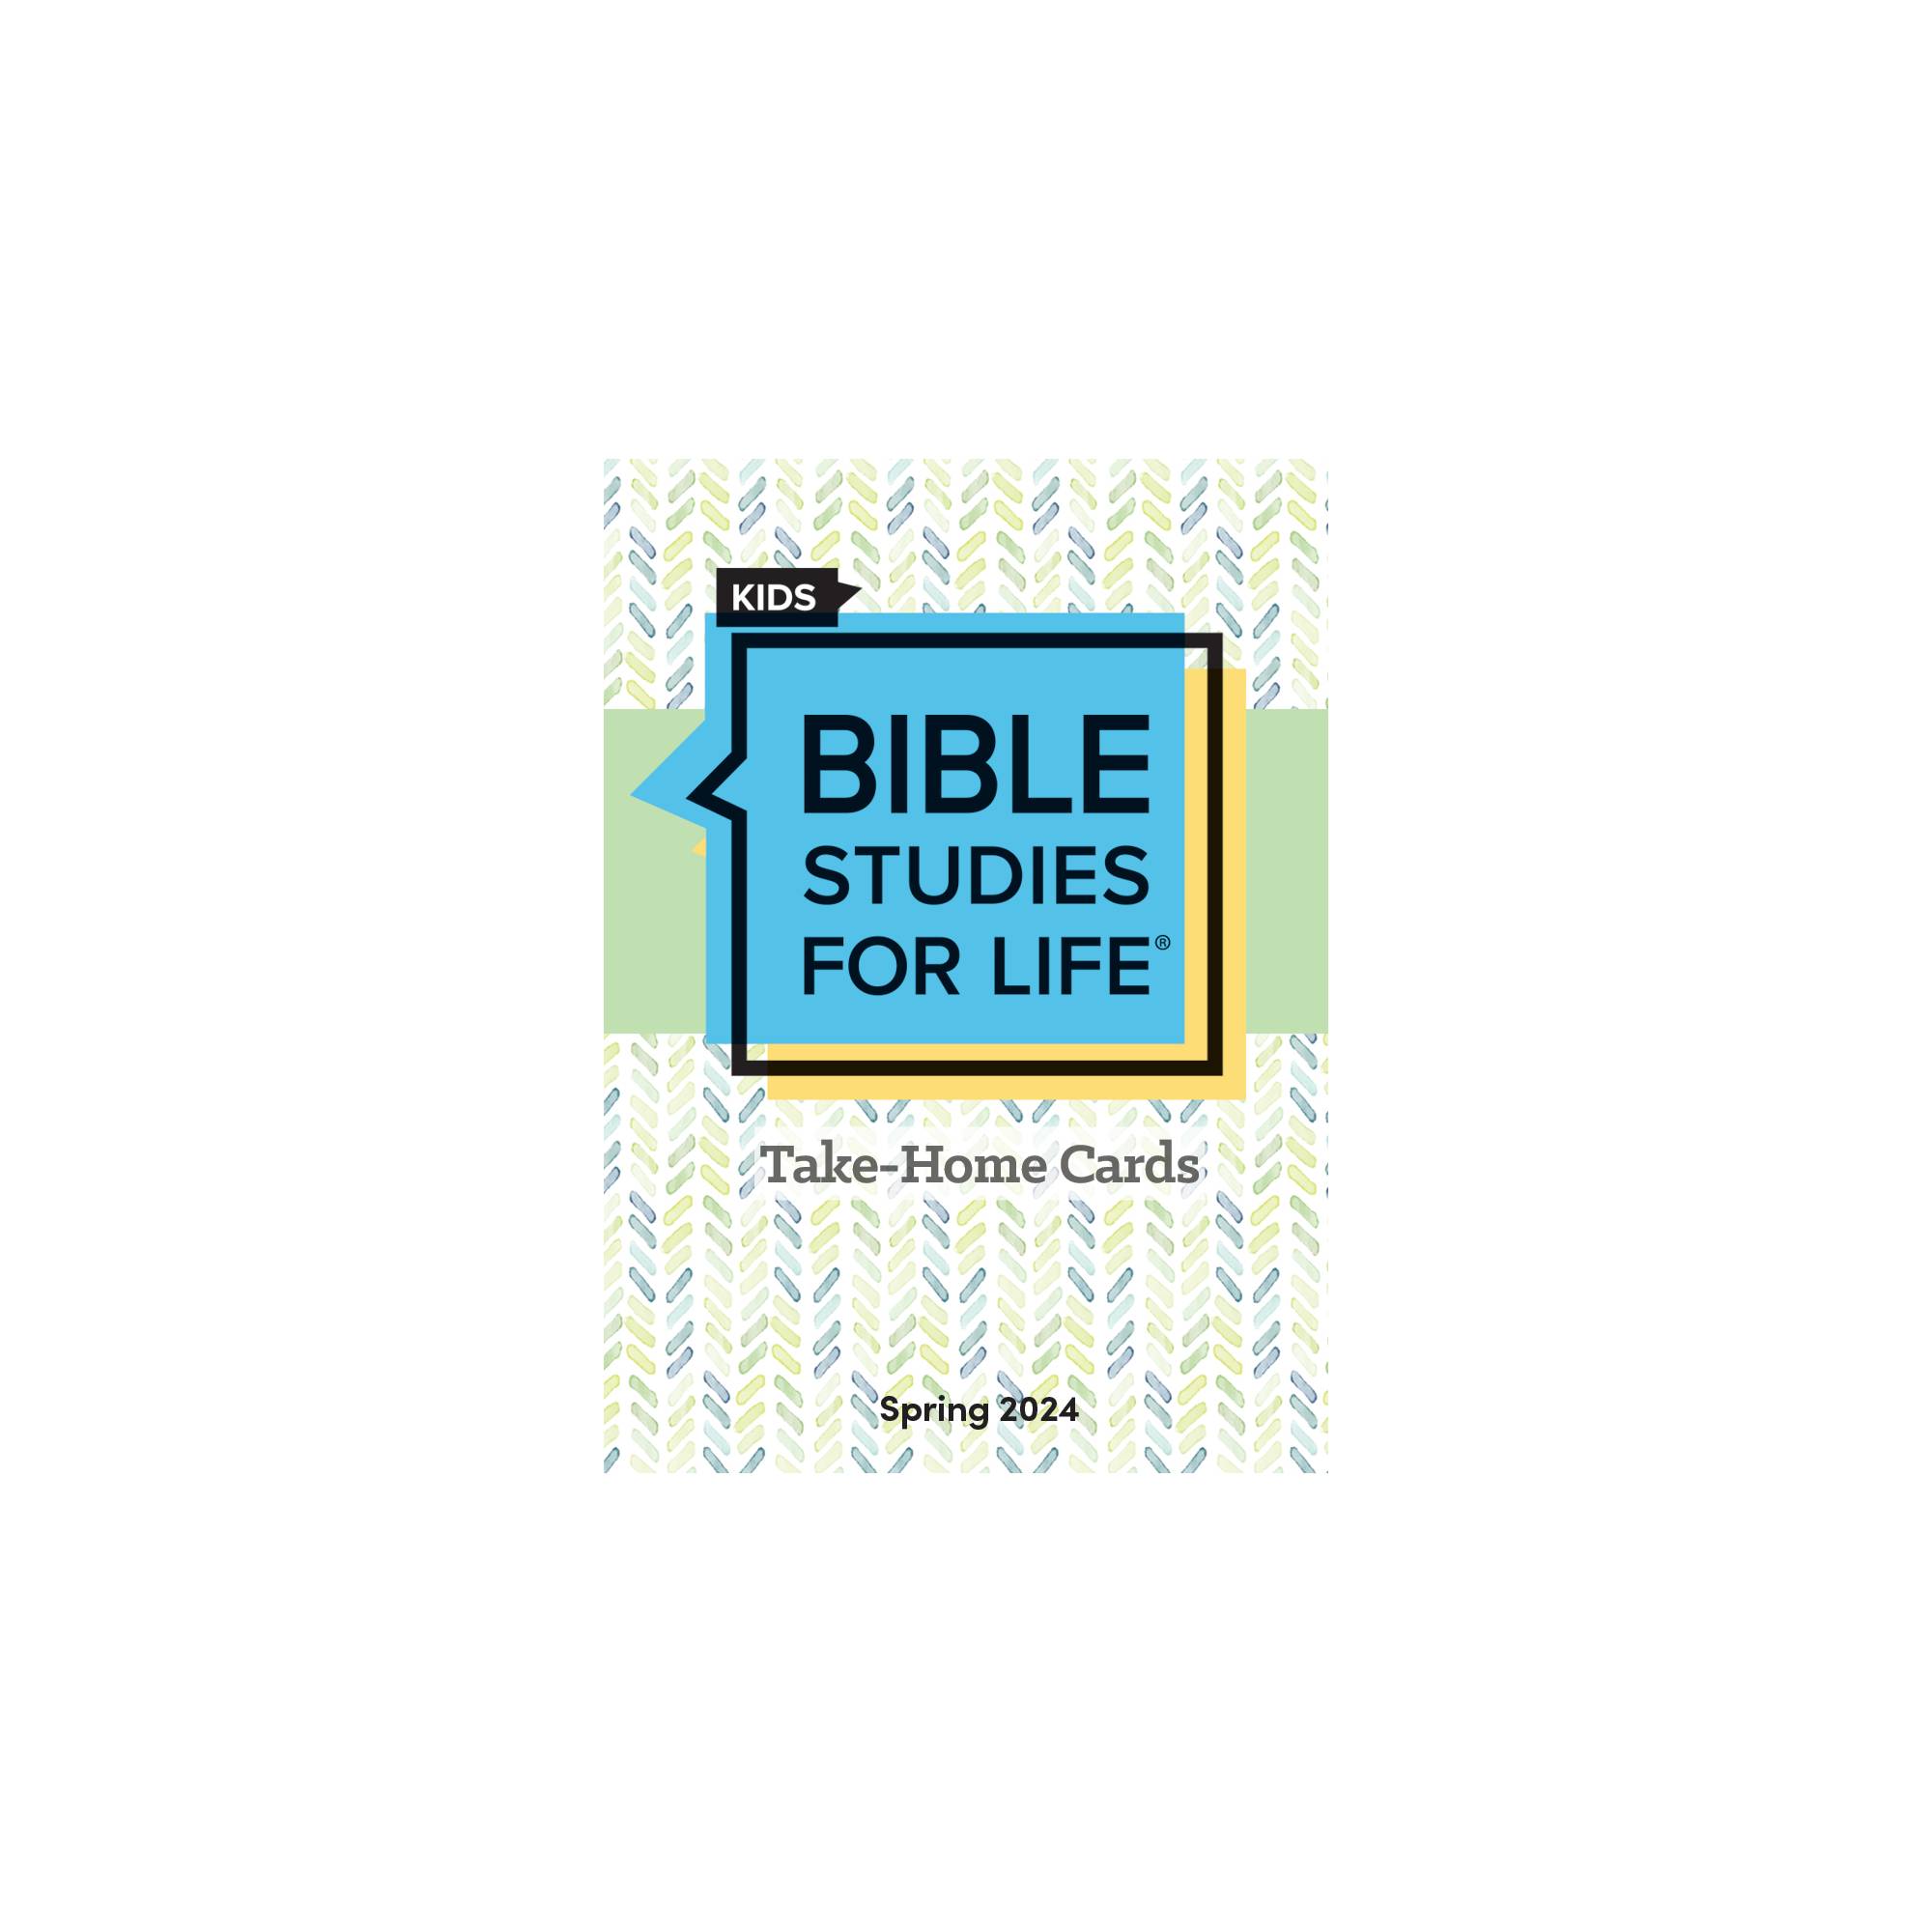 Bible Study Supplies: My Must-Haves – Simple. Home. Blessings